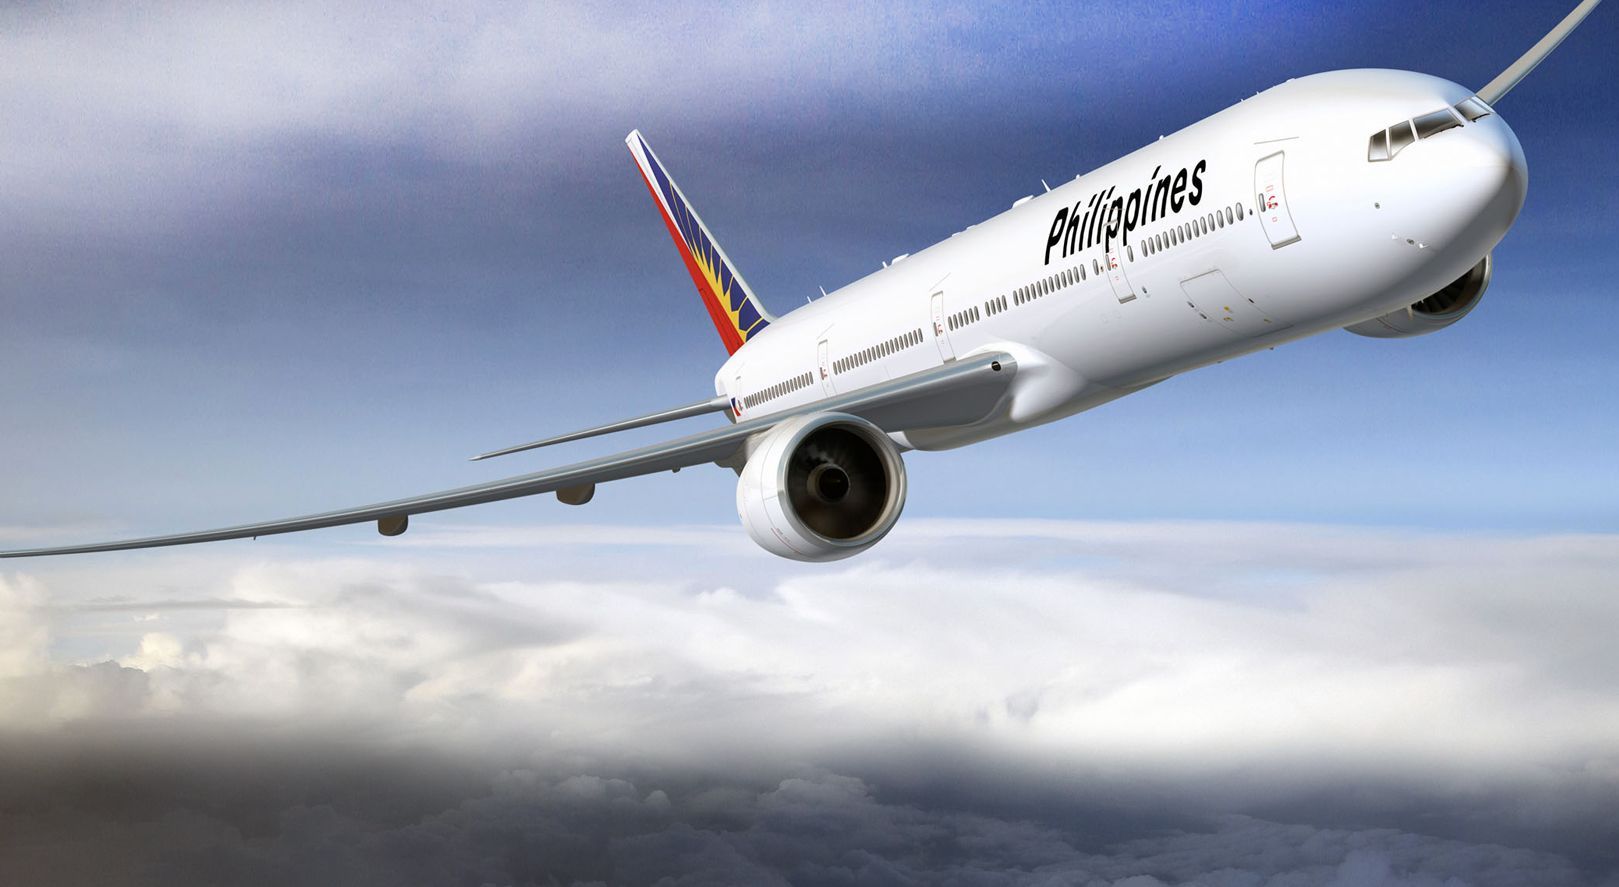 philippine airlines vision and mission